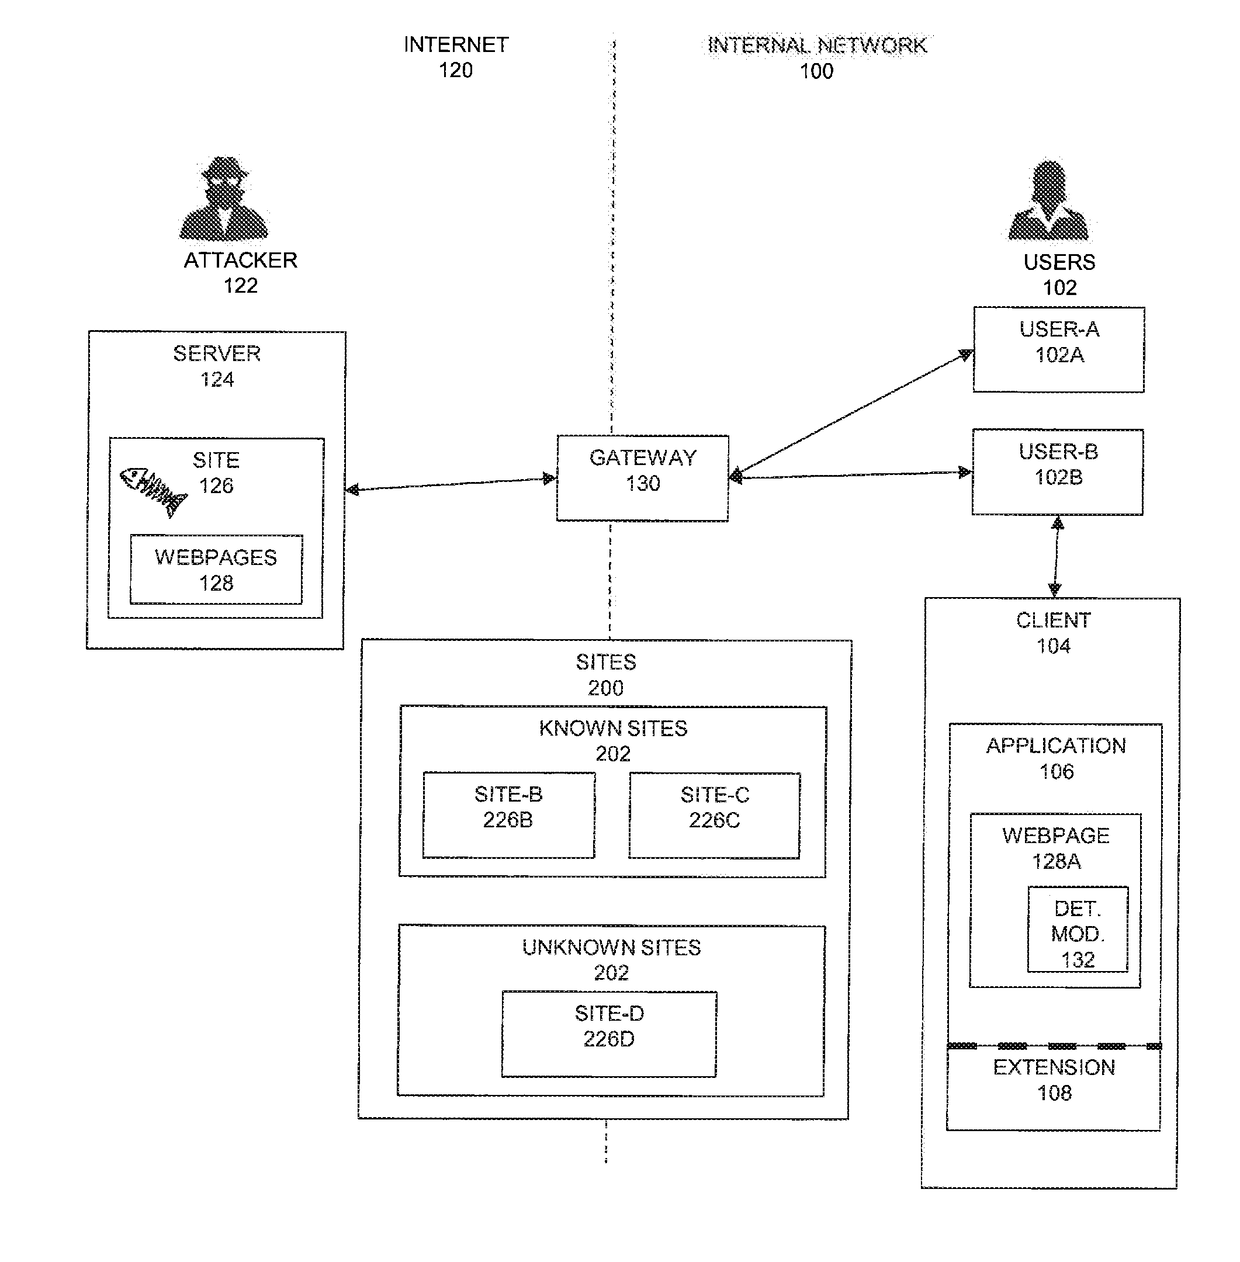 System and method to detect and prevent phishing attacks